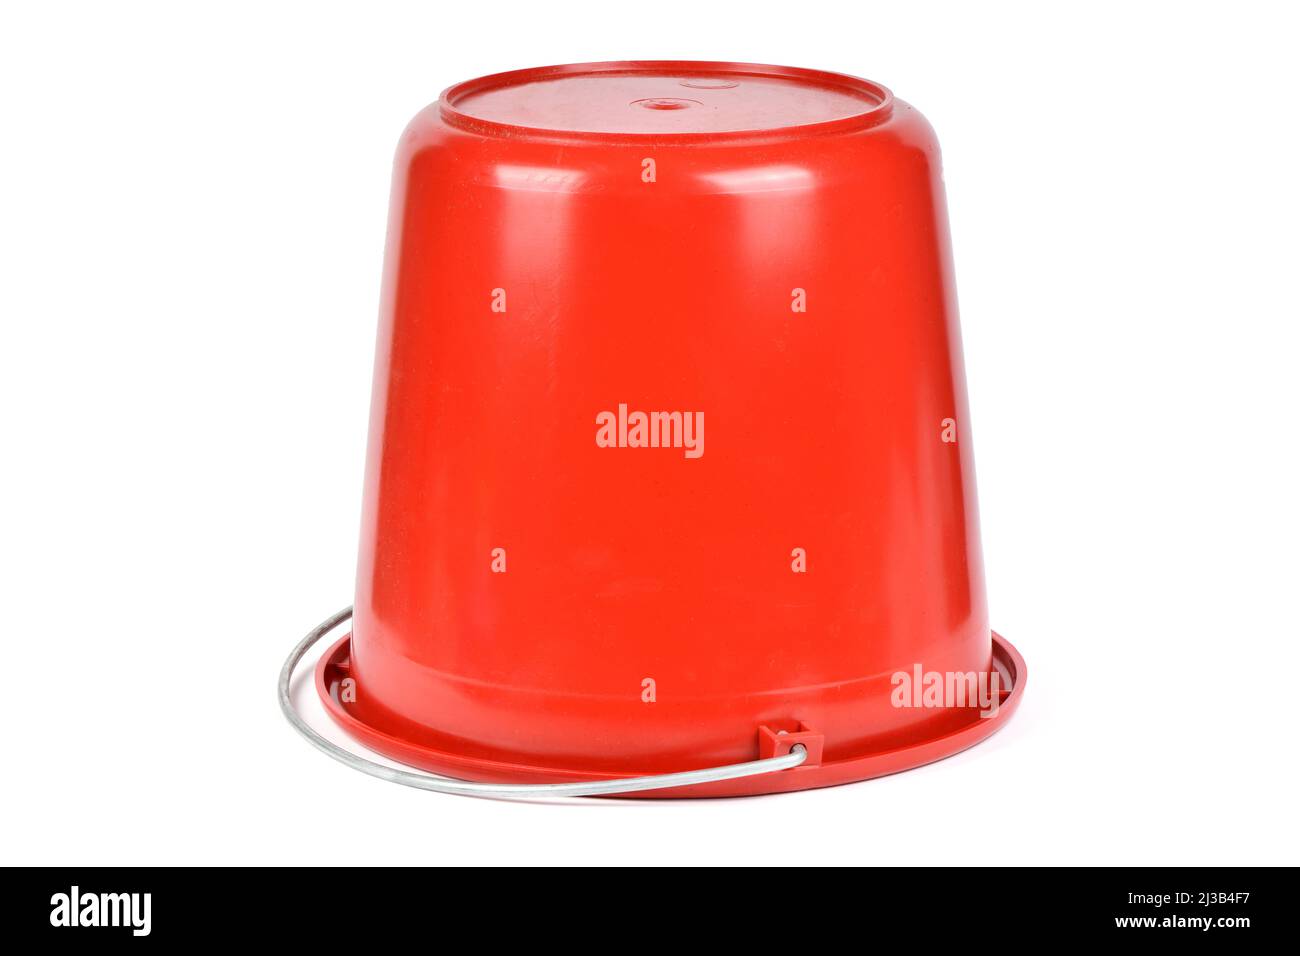 Household buckets Cut Out Stock Images & Pictures - Page 2 - Alamy